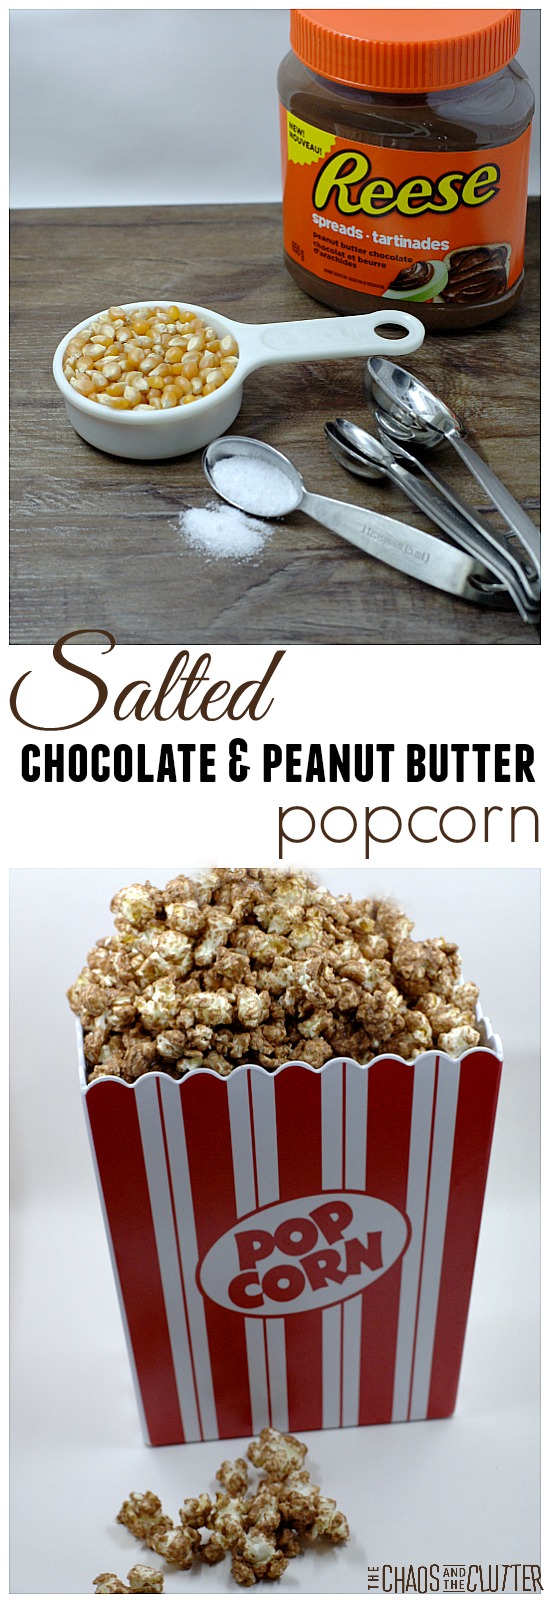 This salted chocolate and peanut butter popcorn is A-Mazing and only has 3 ingredients! (plus it's gluten free)